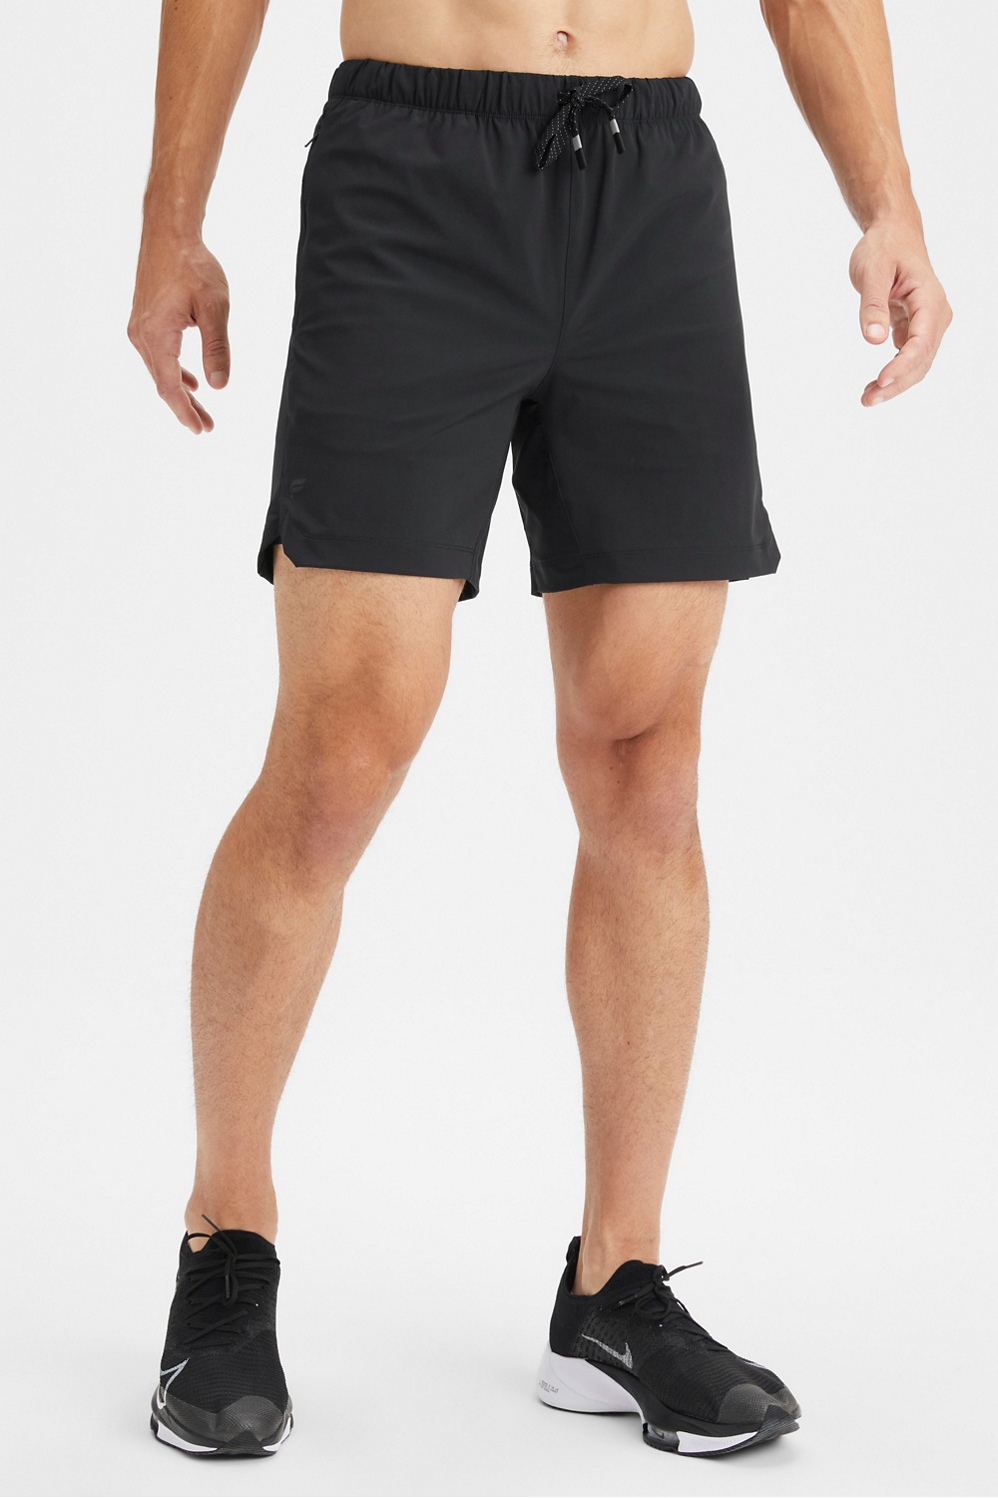 Fabletics Men's The One Short, Training, Swimming, Lightweight, Quick-Dry,  Zip Pocket, Stretch Woven